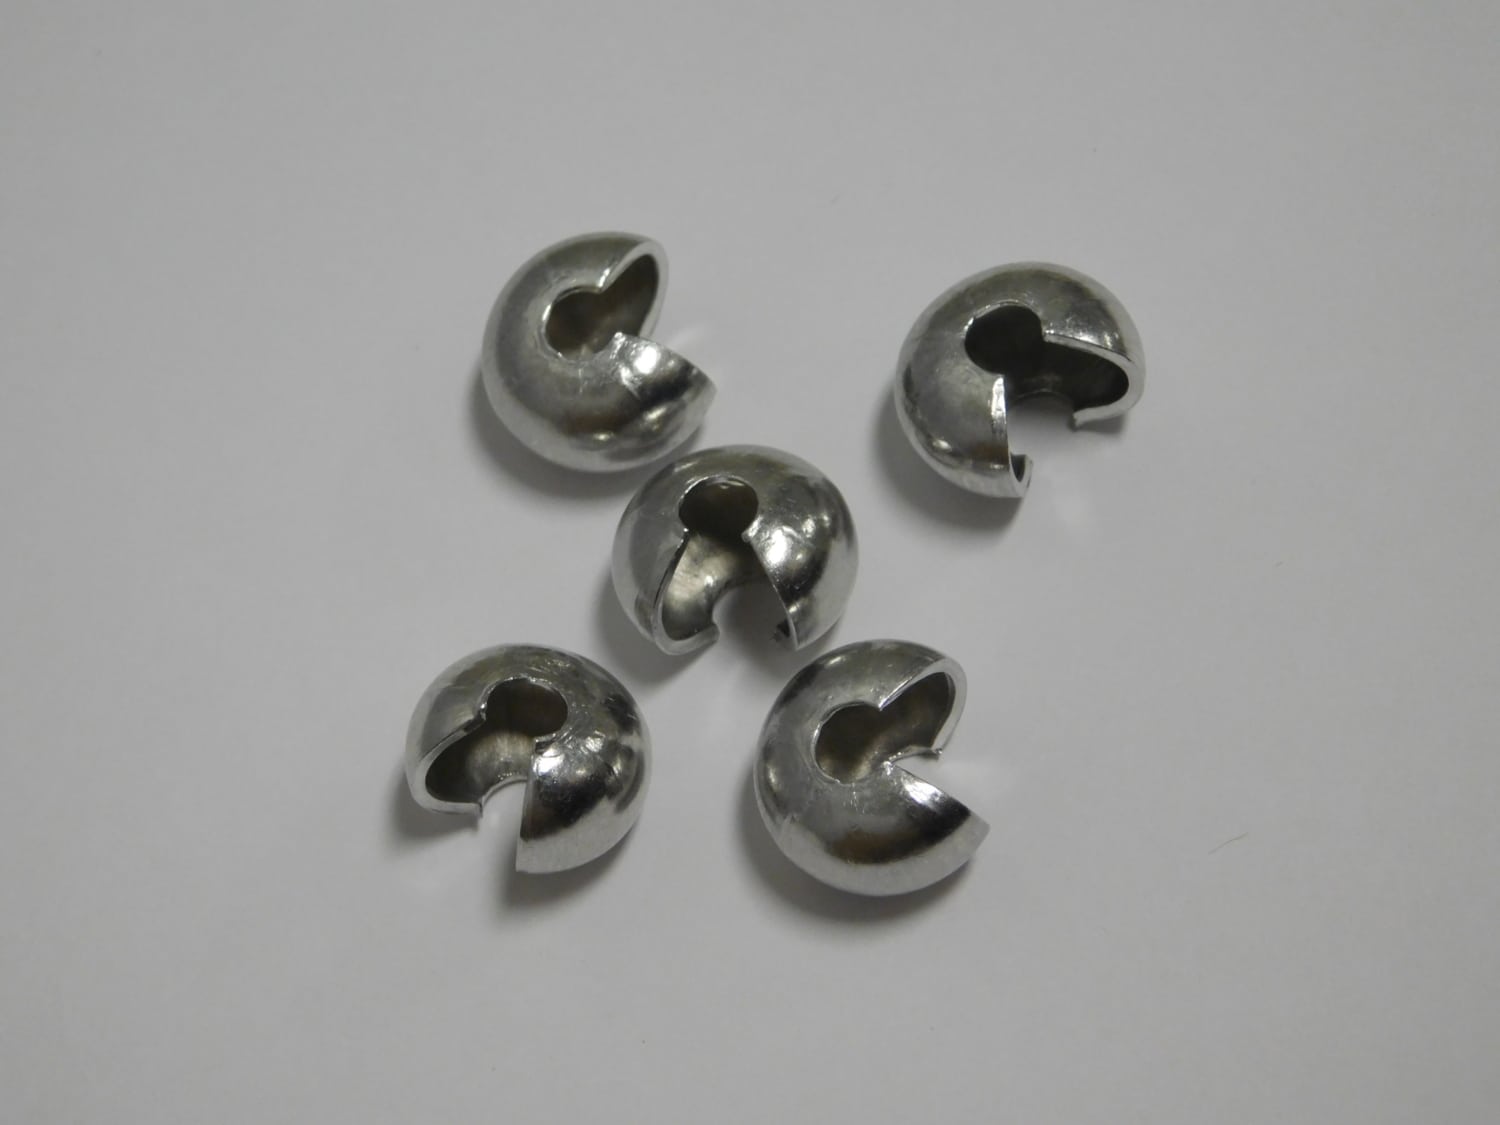 CHAIN BALL STOPPERS FOR ANY ROLLER HOLLAND BLIND CLEAR CHAIN HOLDER STOPPER 